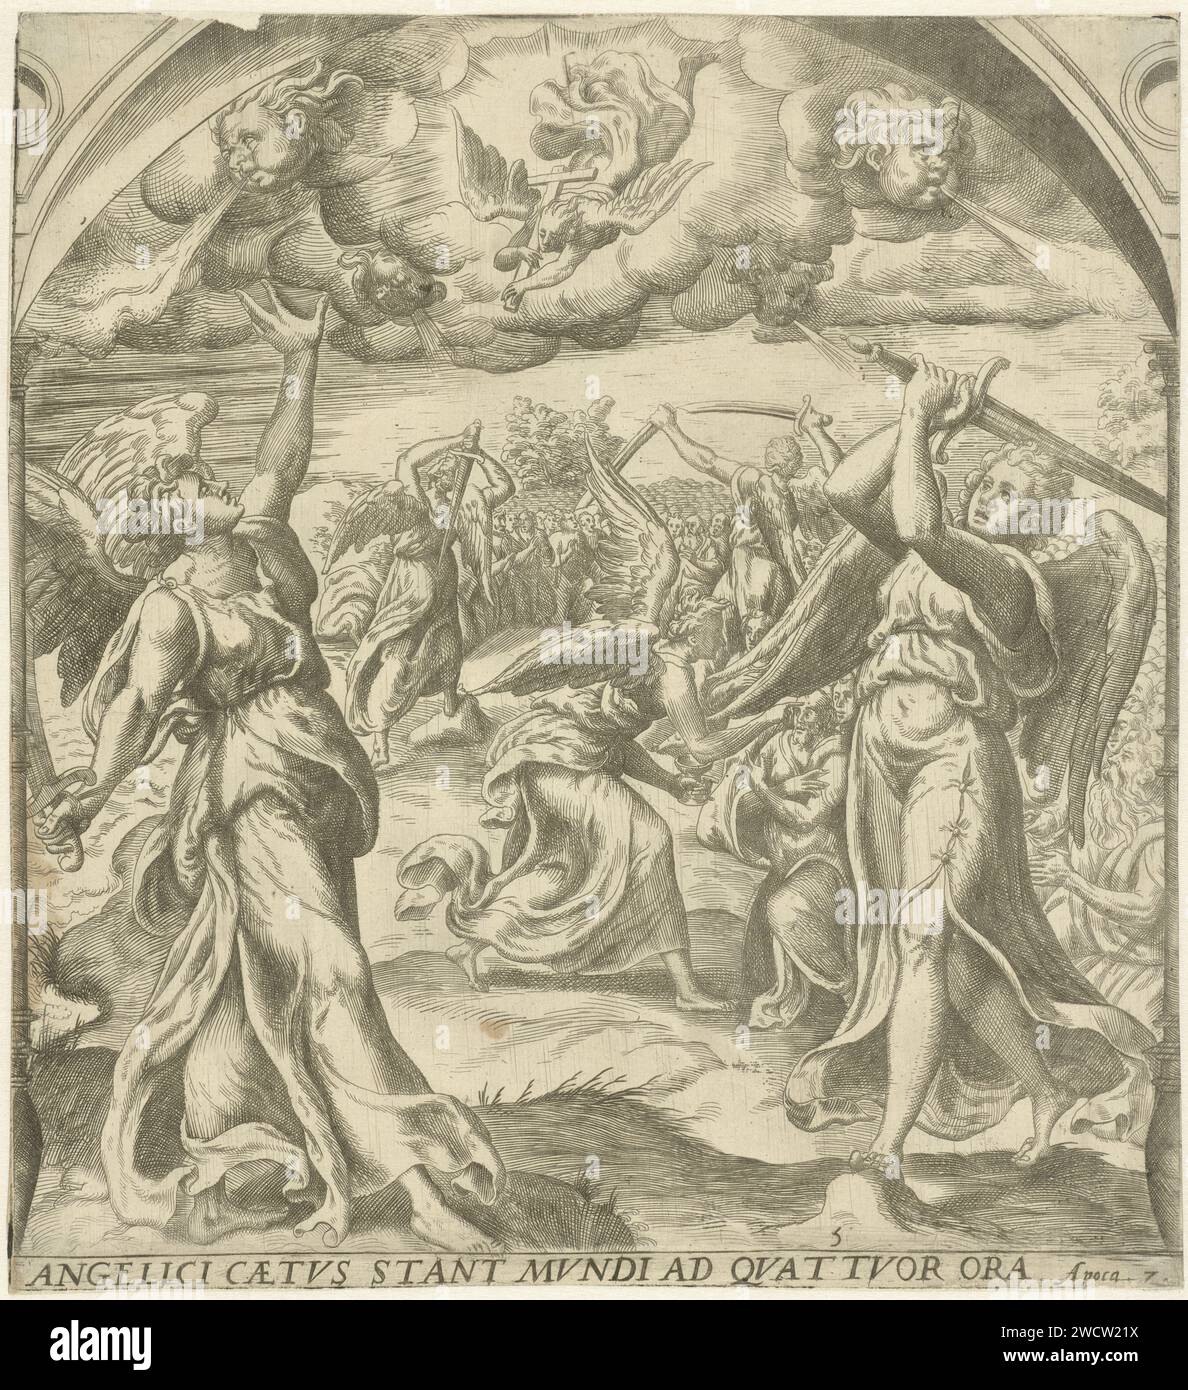 Four angels stop the four winds, Gerard van Groeningen, 1563 - 1574 print With swords, four angels control the four winds of the earth. Another angel drops with a cross from heaven. He then blesses the front heads of good Christians with the seal of the living God (op. 7: 1-8). Antwerp paper etching / engraving the four winds are restrained by four angels. sealing of the tribes of Israel, the 144-thousand Stock Photo